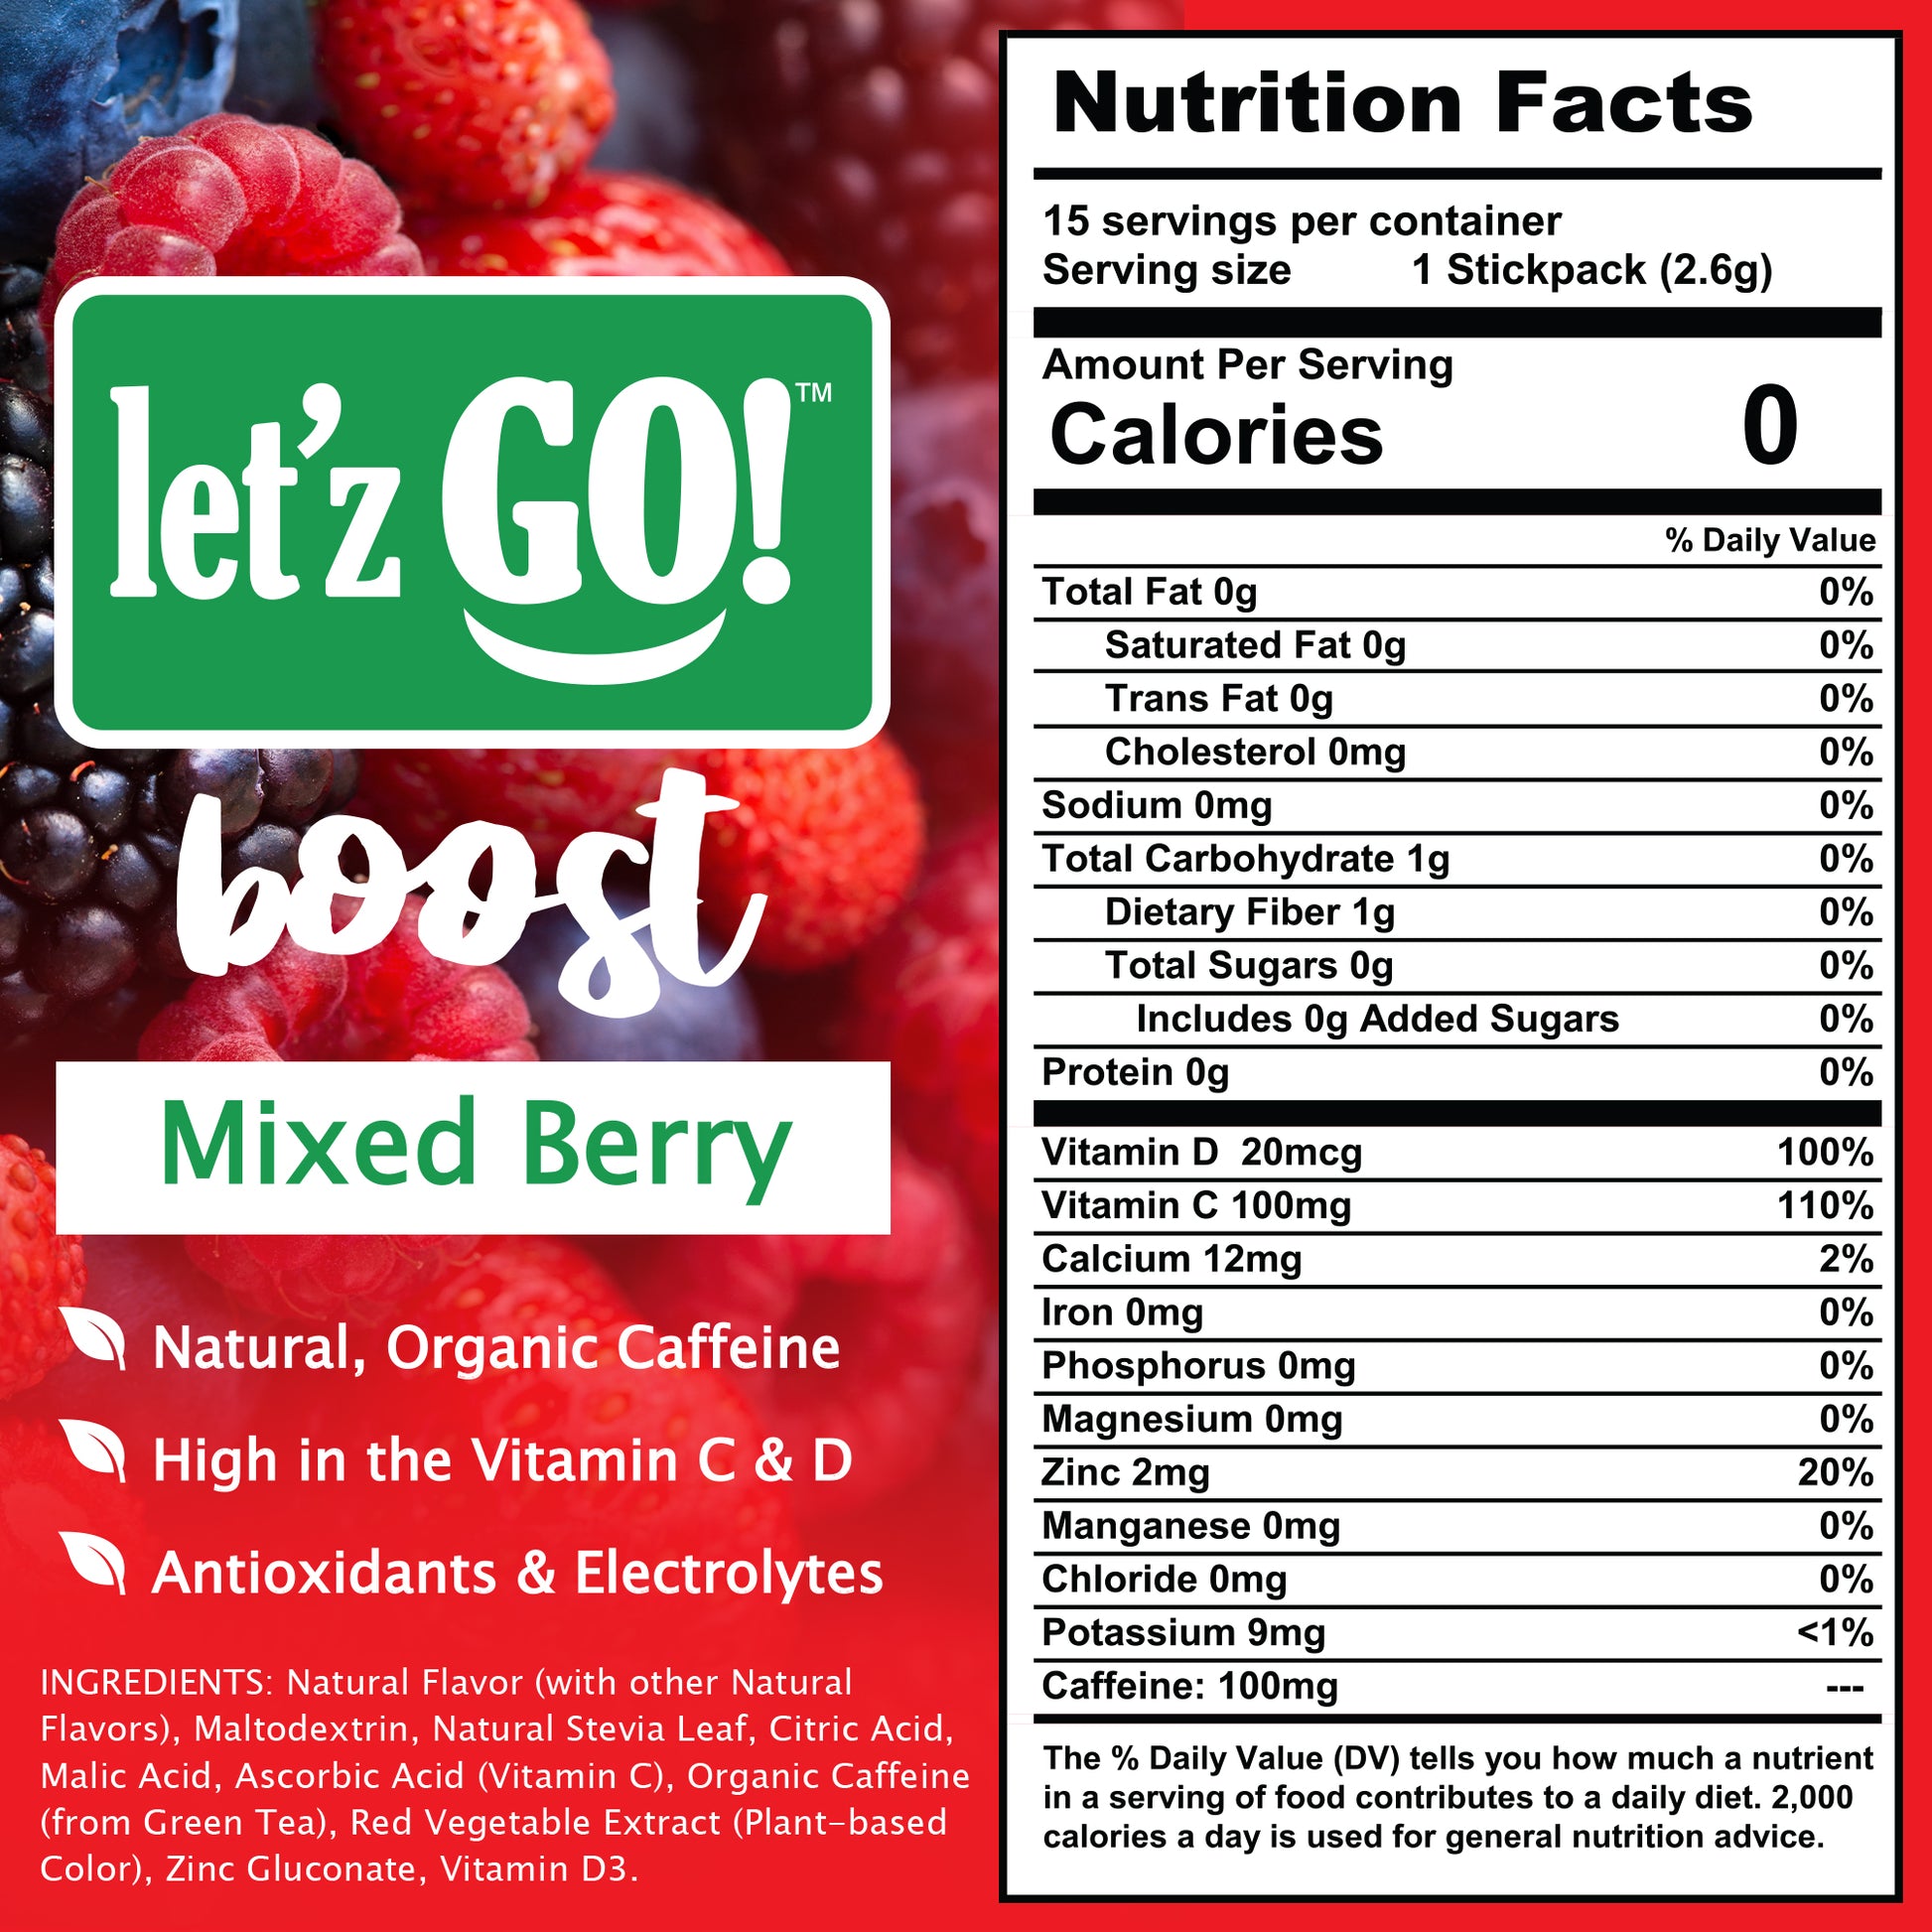 Let'z Go Boost is made with natural organic caffeine, from green tea, and is high in Vitamin C and D, Antioxidants, and Electrolytes